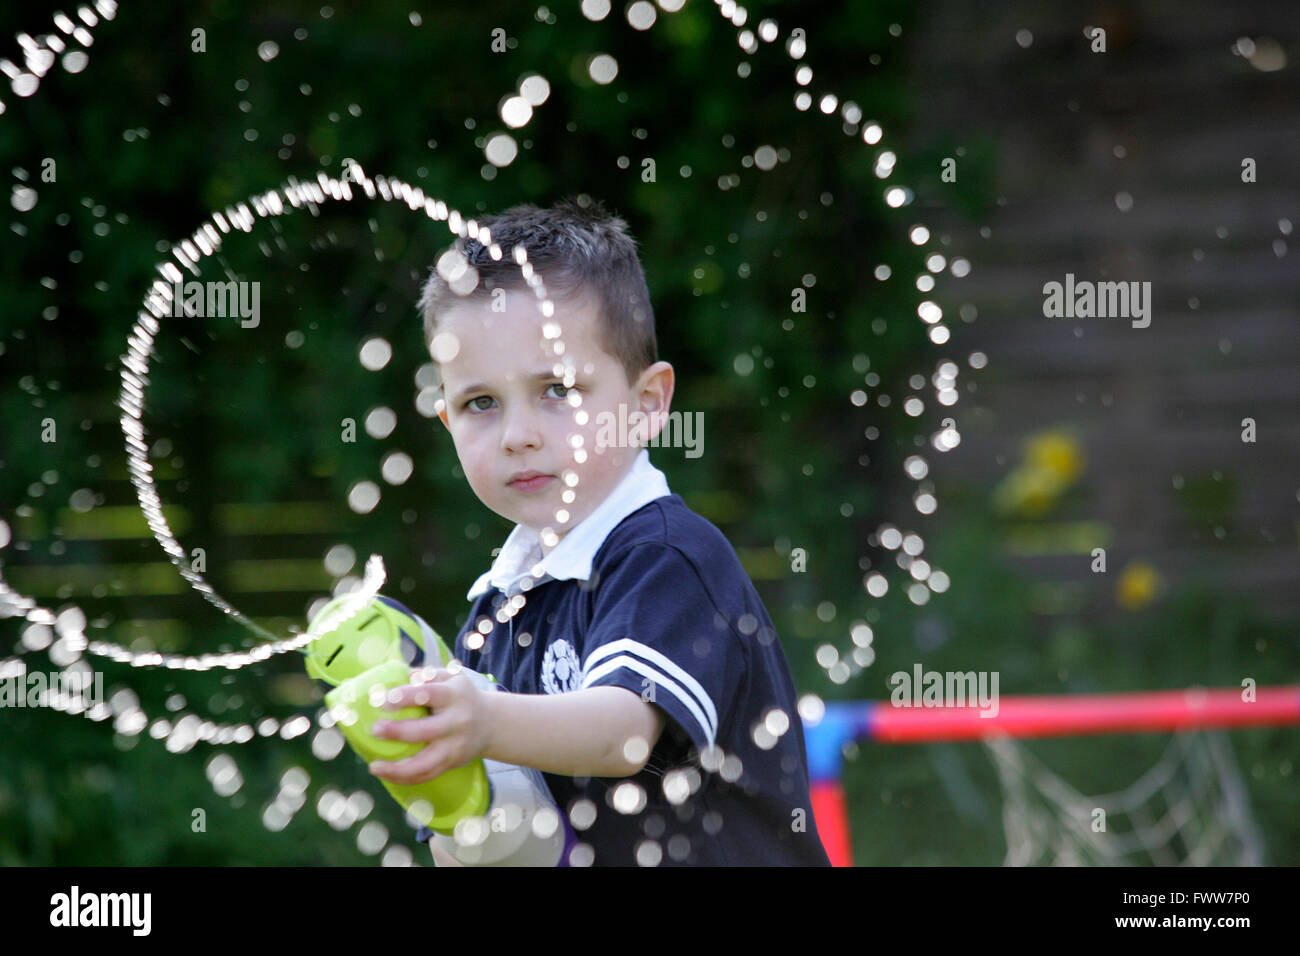 Boy playing in garden with water pistol Stock Photo